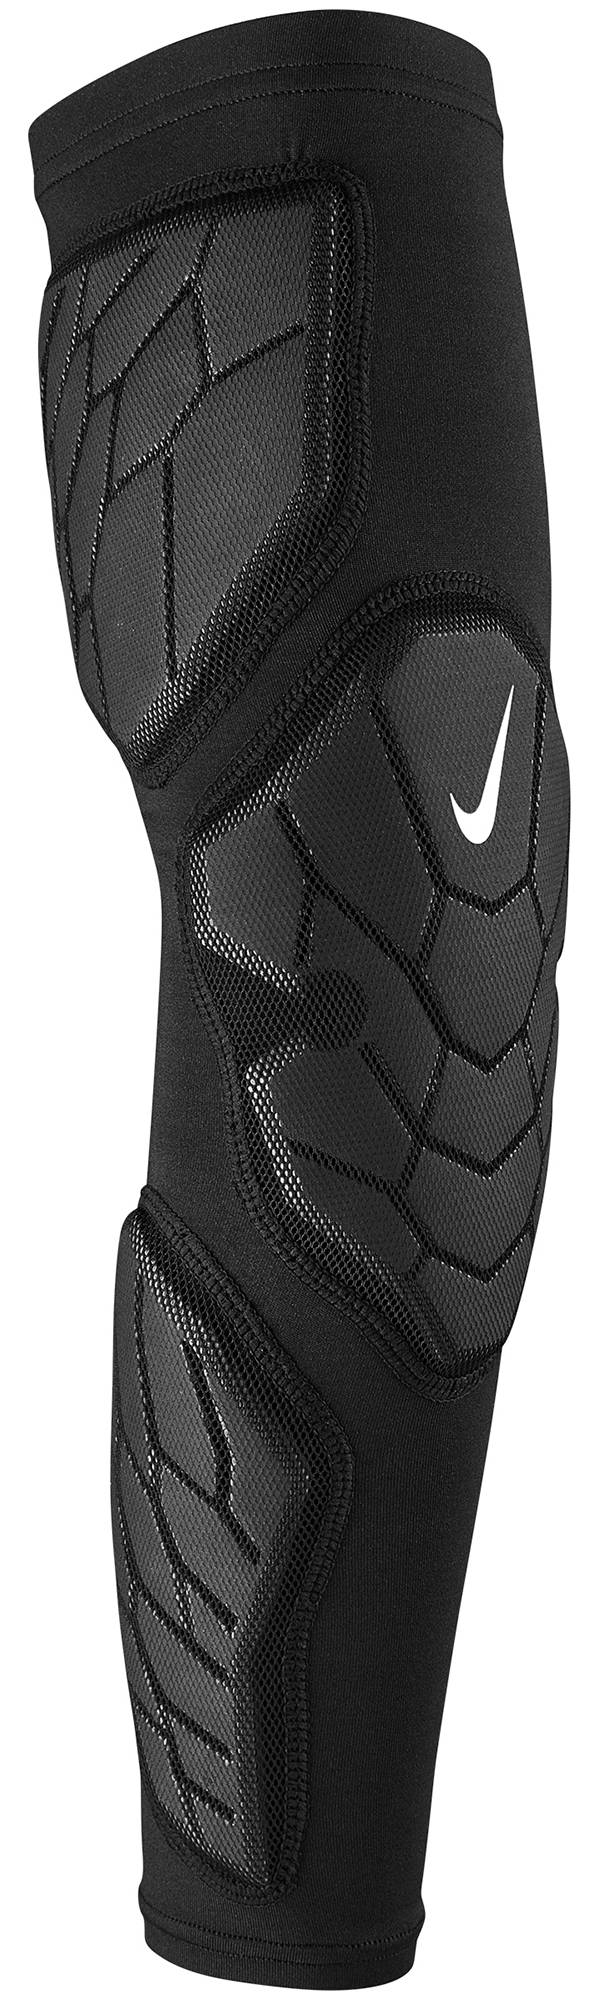 Men's Nike Hyperstrong Padded Shin Sleeves Black/White Size Small/Medium :  : Sports & Outdoors